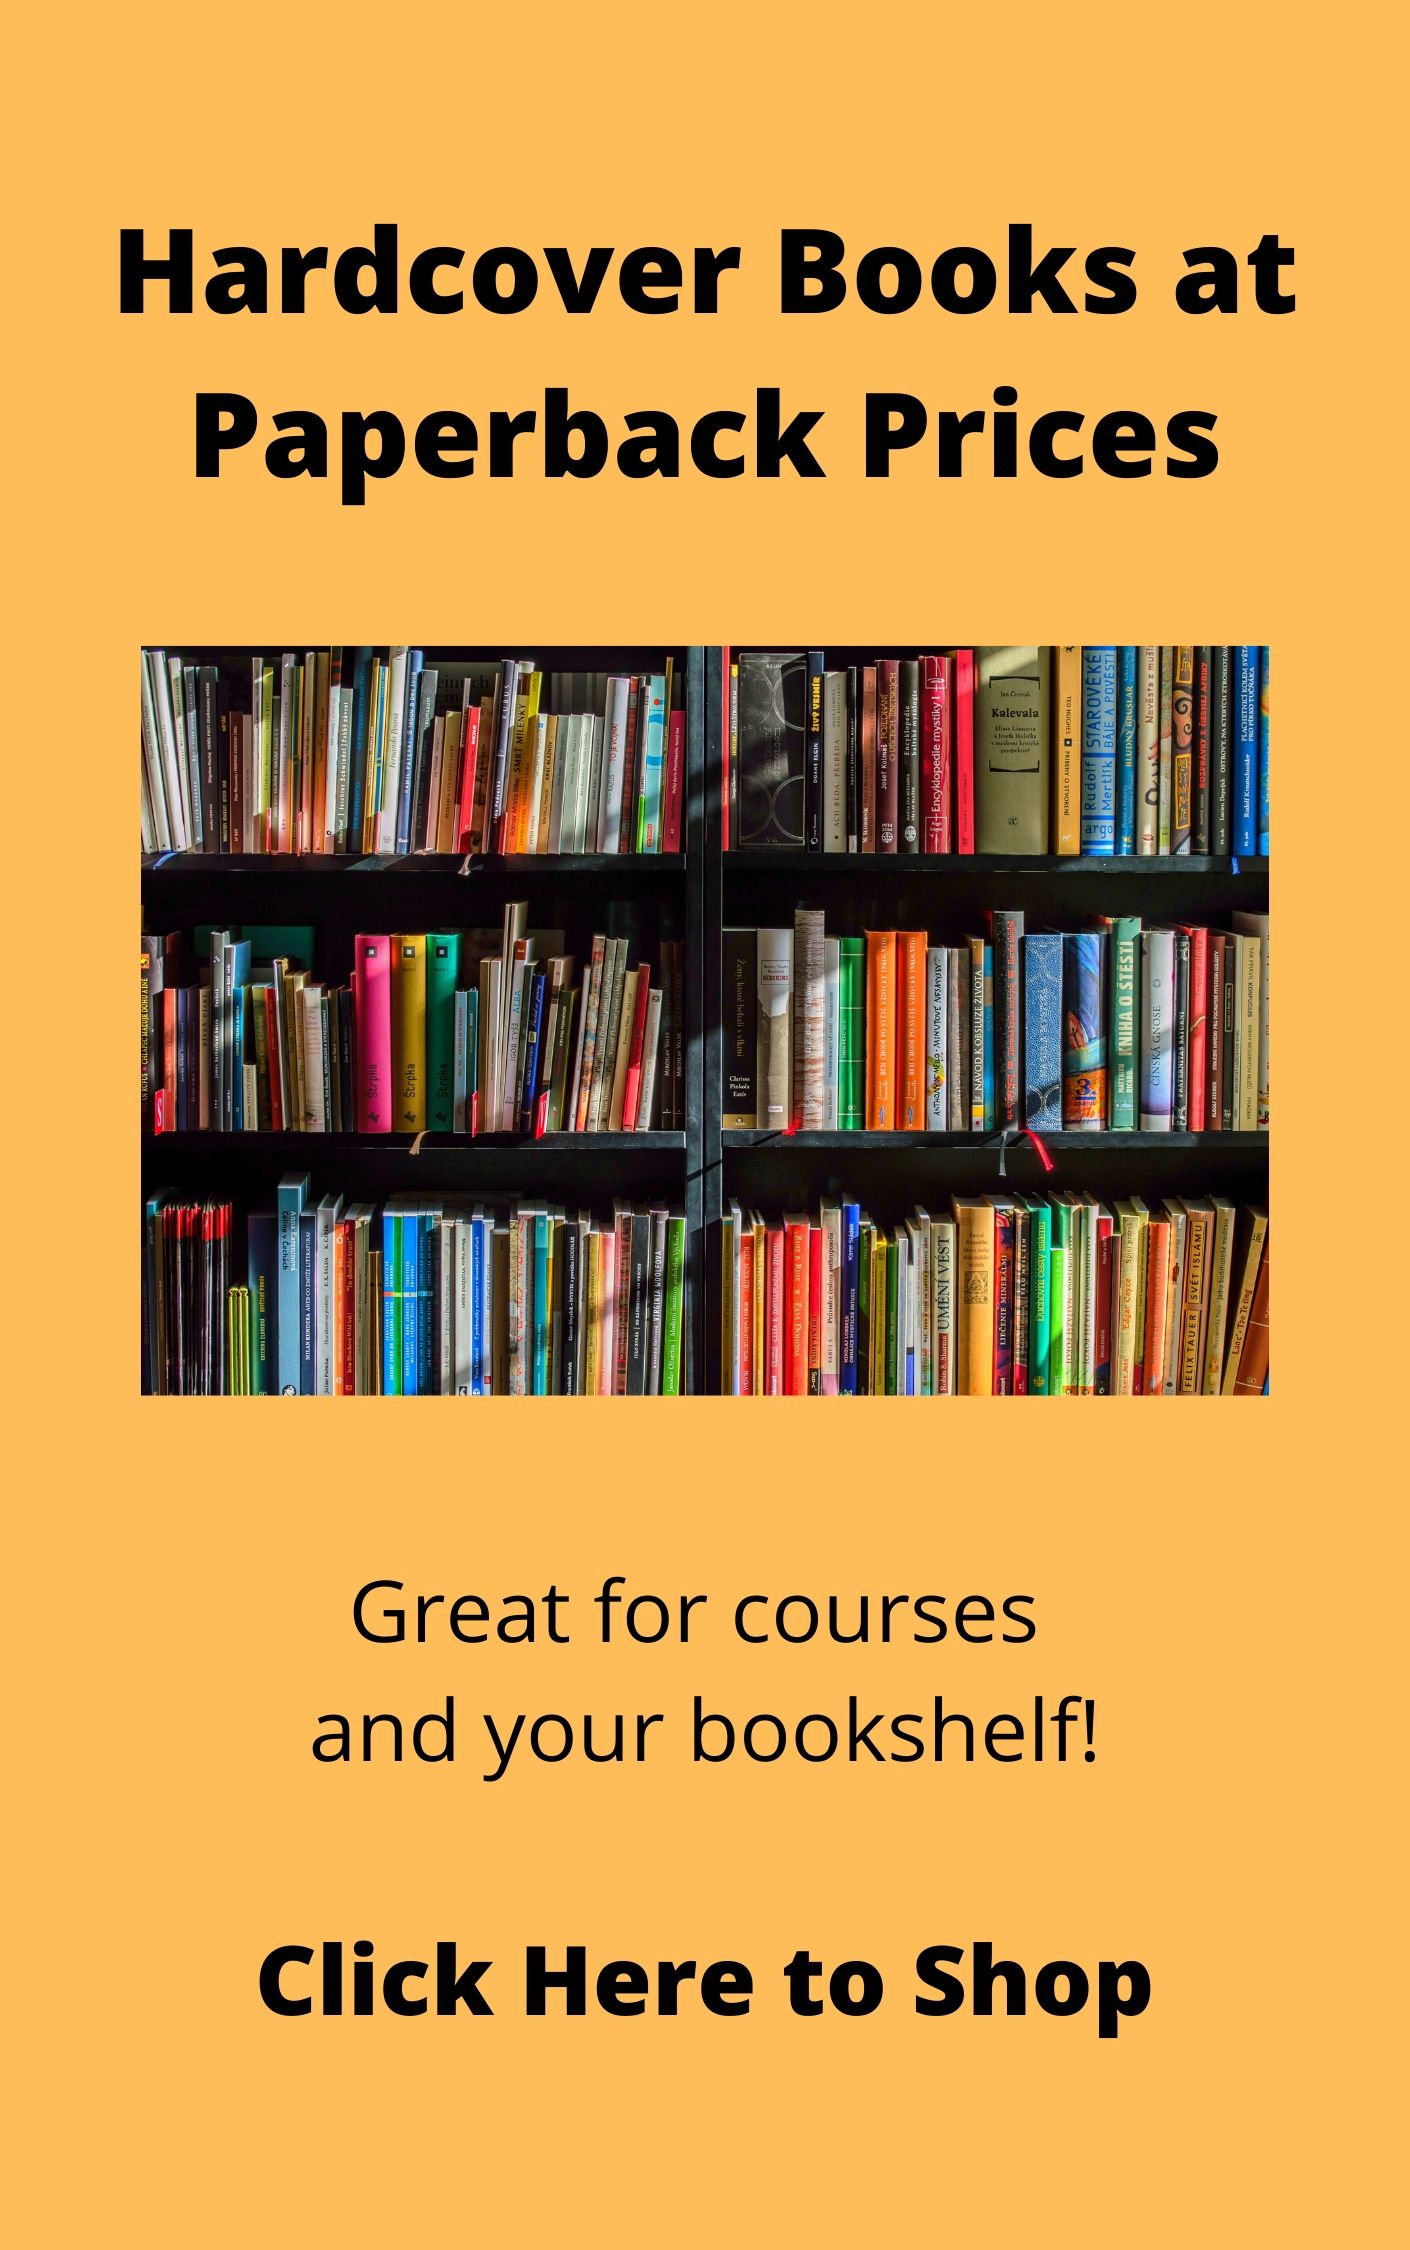 image card for our hadcover books that are now at paperback prices, online at http://gupress.gallaudet.edu/hardcover-at-paperback-prices.html